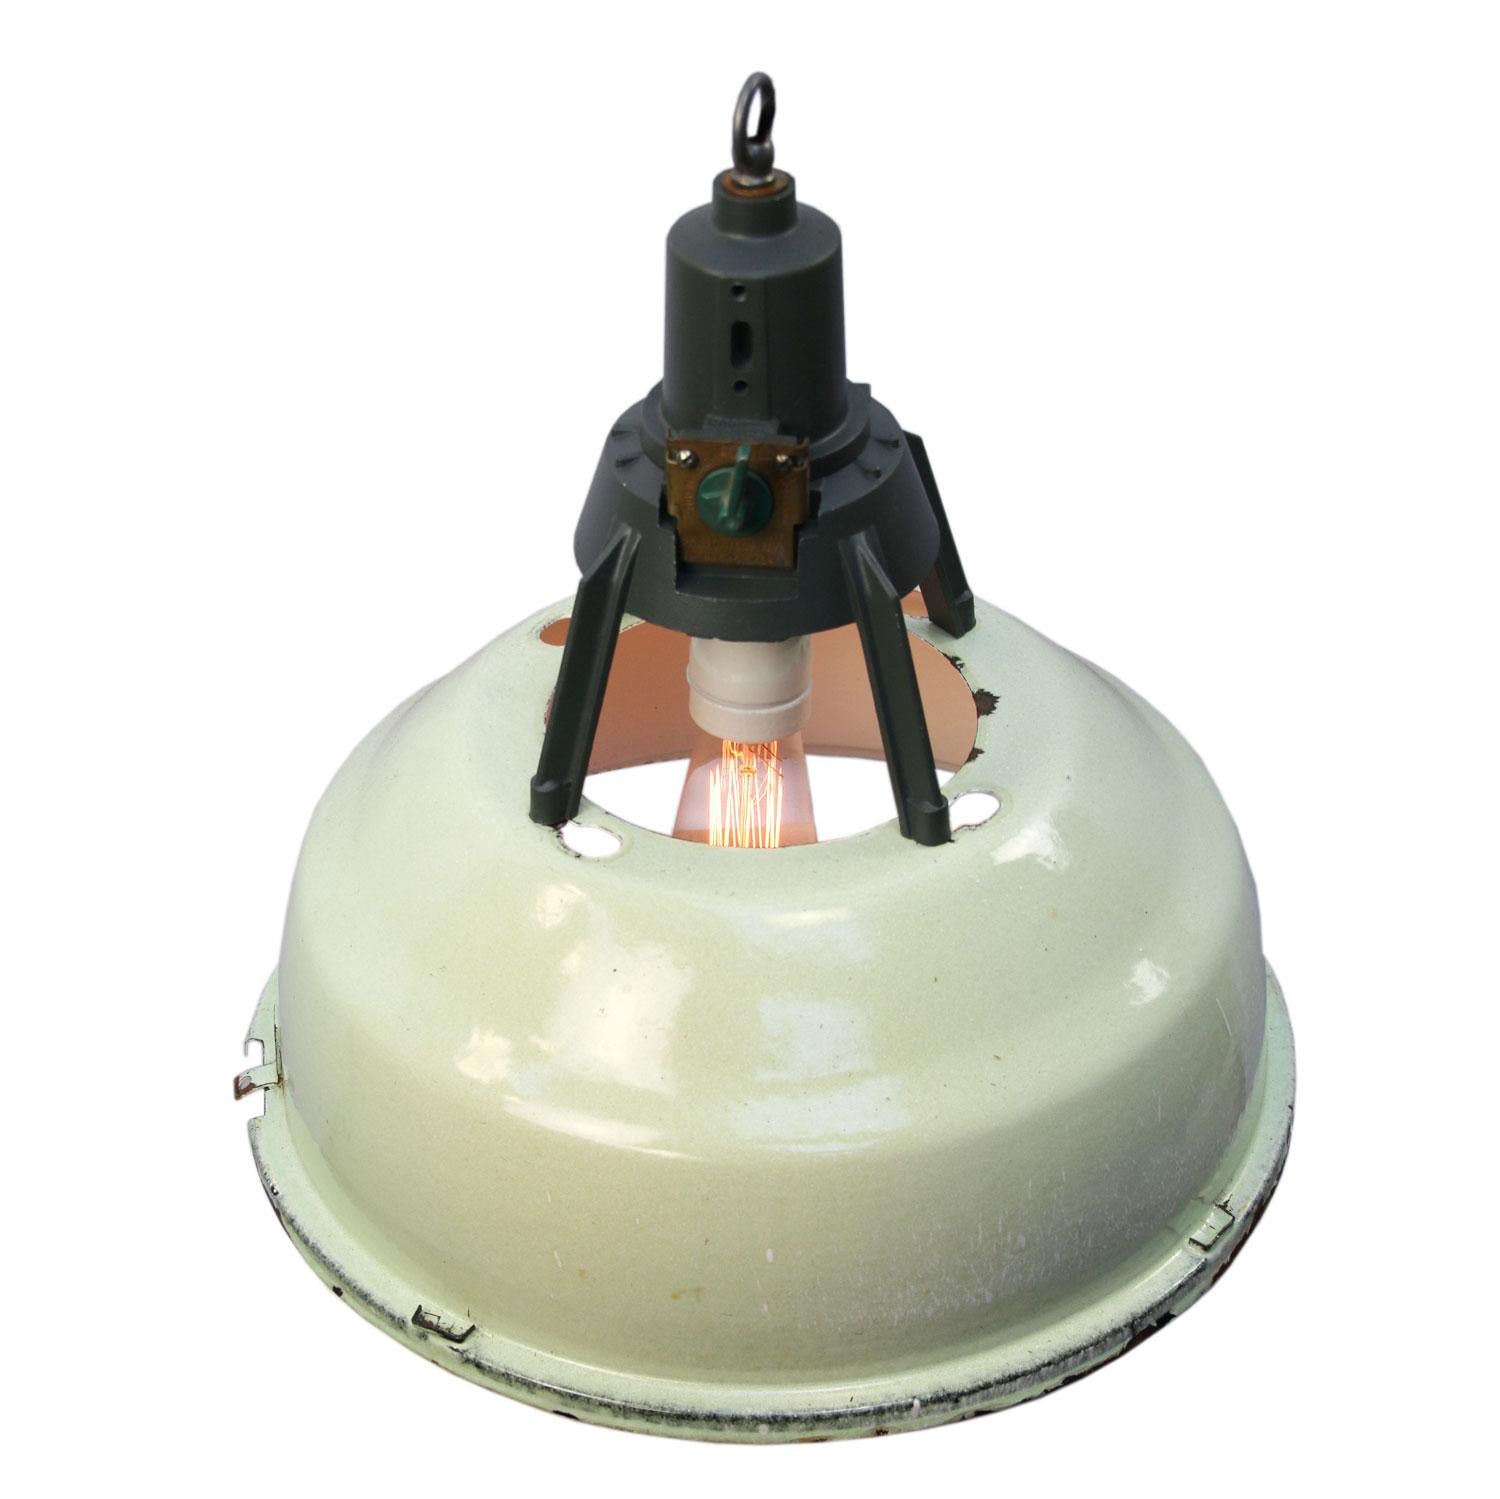 Enamel industrial pendant
Light green enamel shade, white inside.
Dark gray cast aluminum top

Weight: 2.20 kg / 4.9 lb

Priced per individual item. All lamps have been made suitable by international standards for incandescent light bulbs,